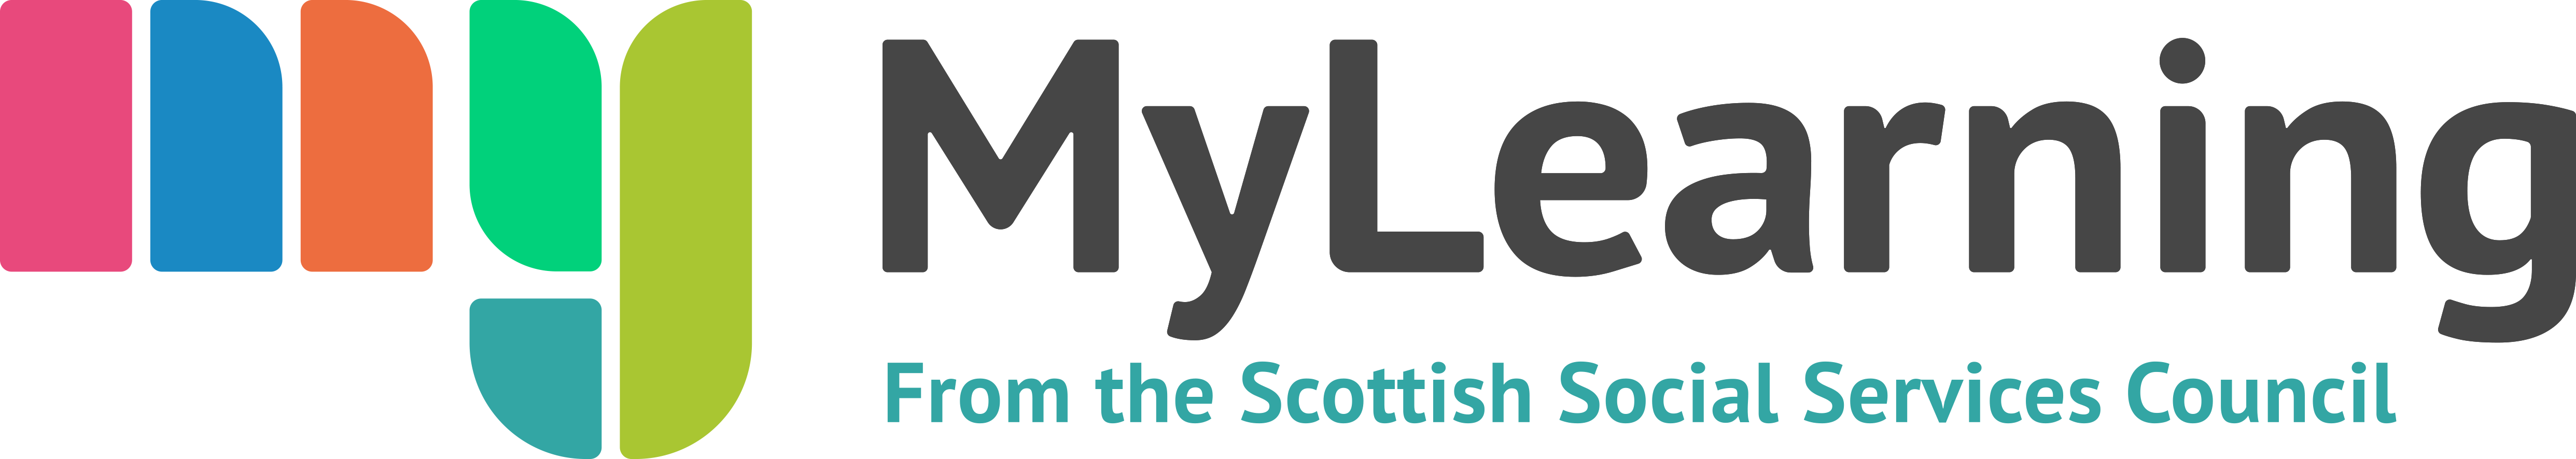 MyLearning from the Scottish Social Services Council